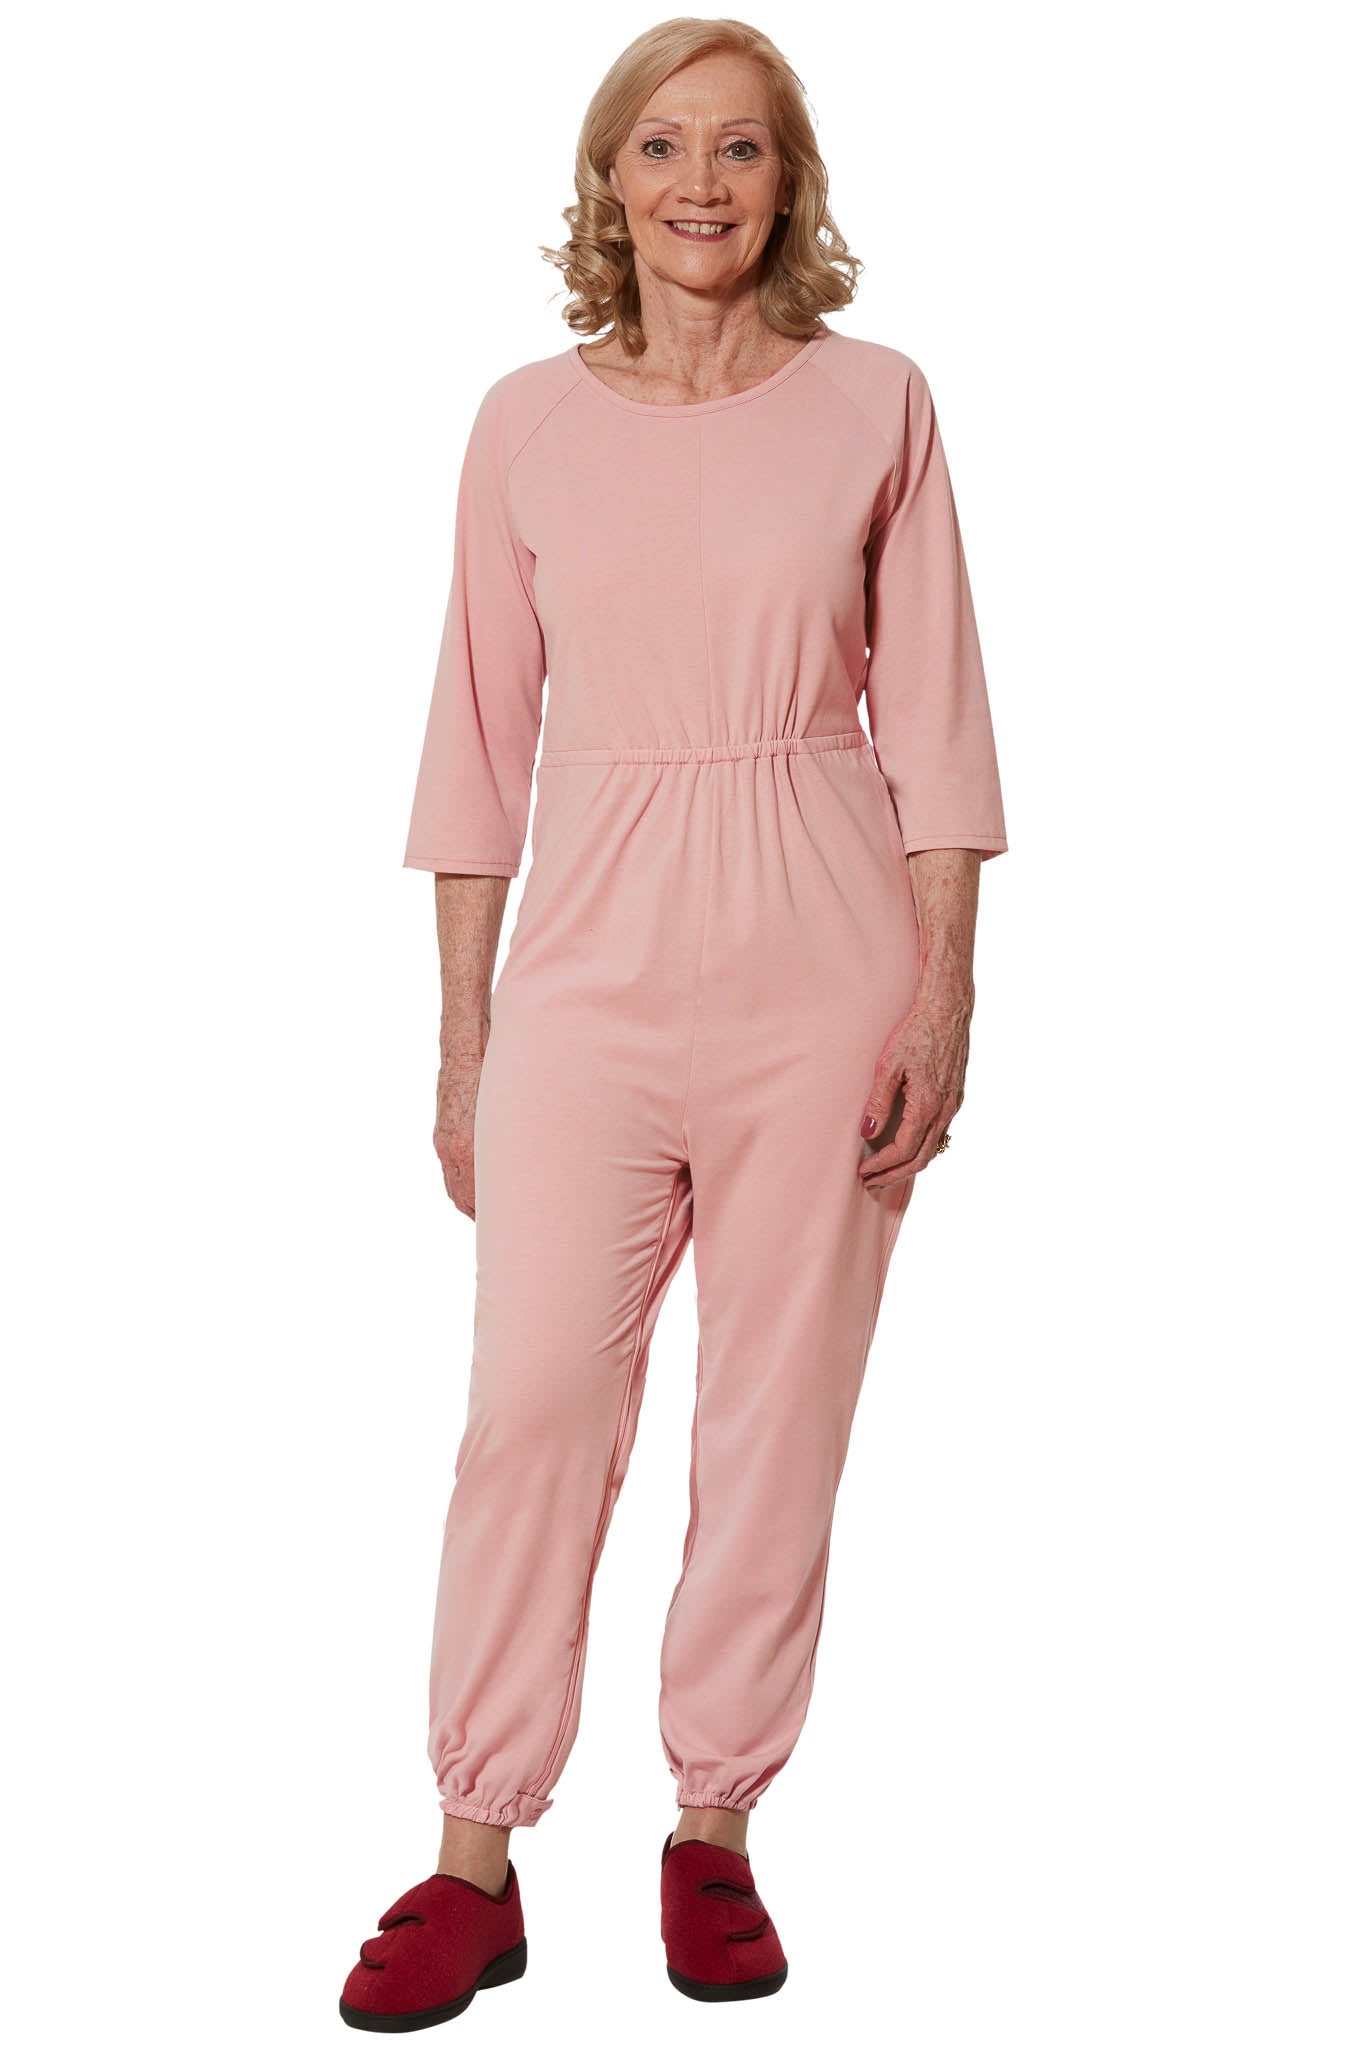 Anti-Strip Jumpsuit for Women - Pink | Carrie | Adaptive Clothing by Ovidis